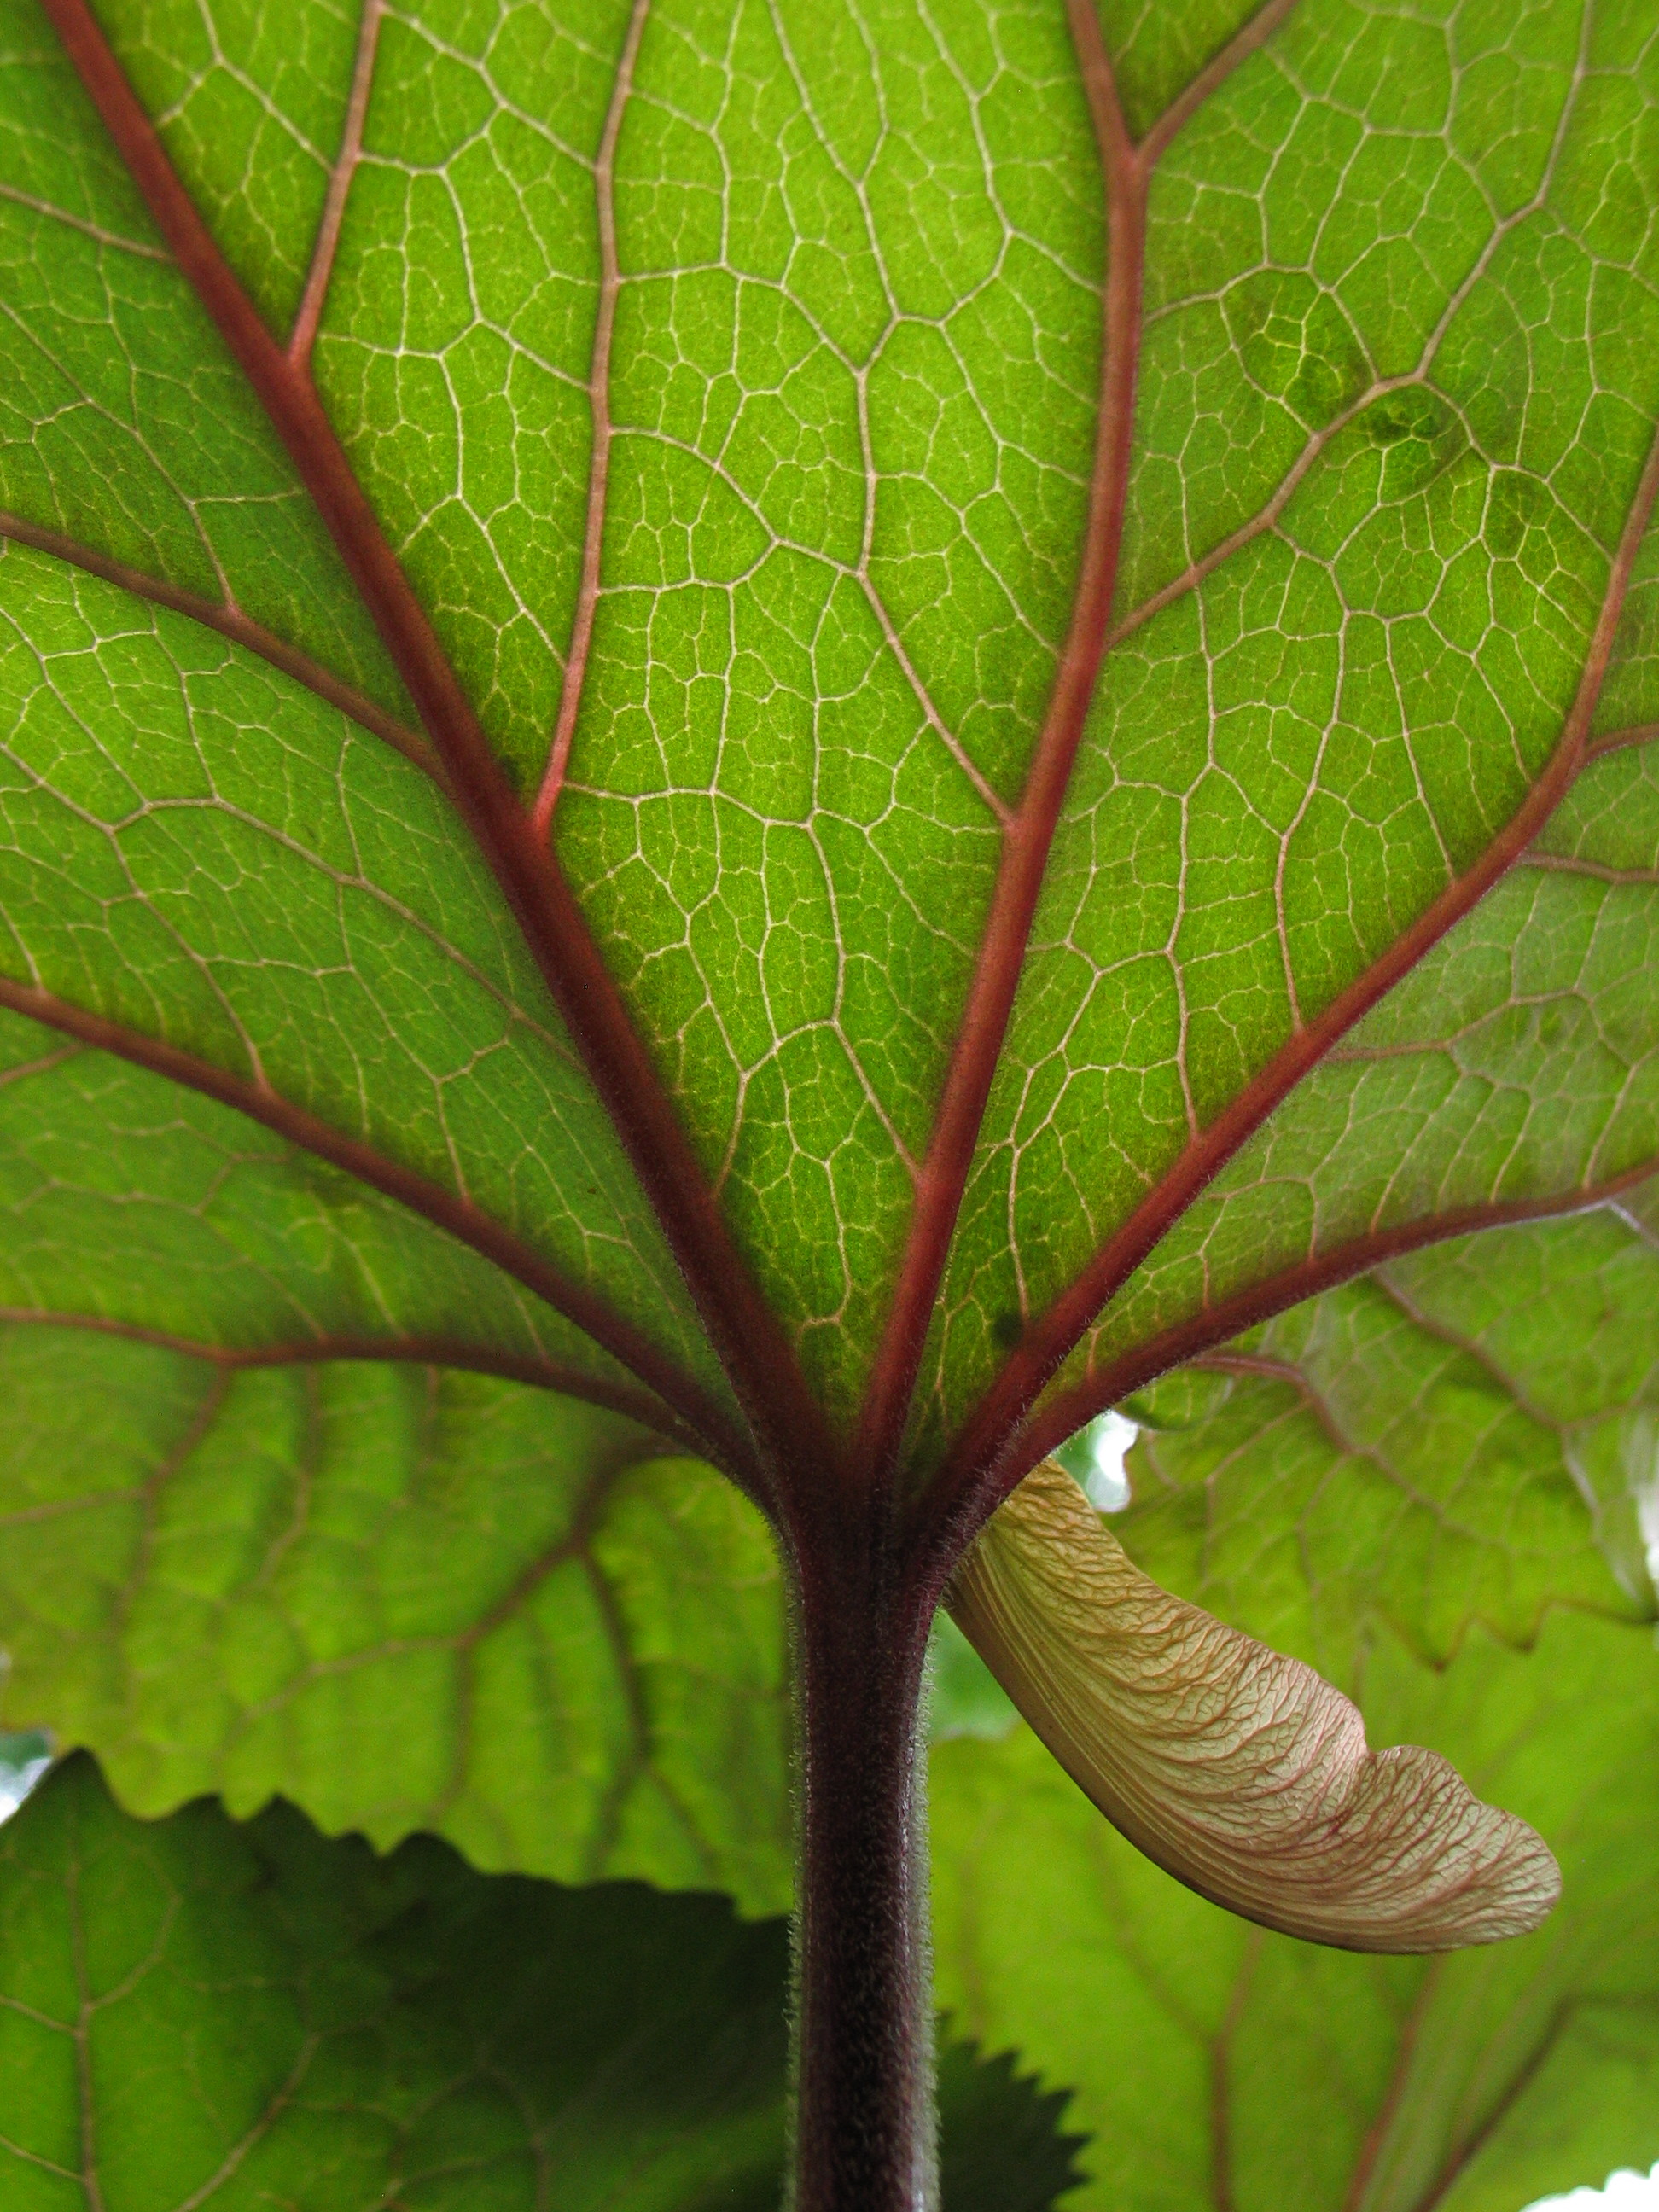 Close-up of growing chard with a maple seed